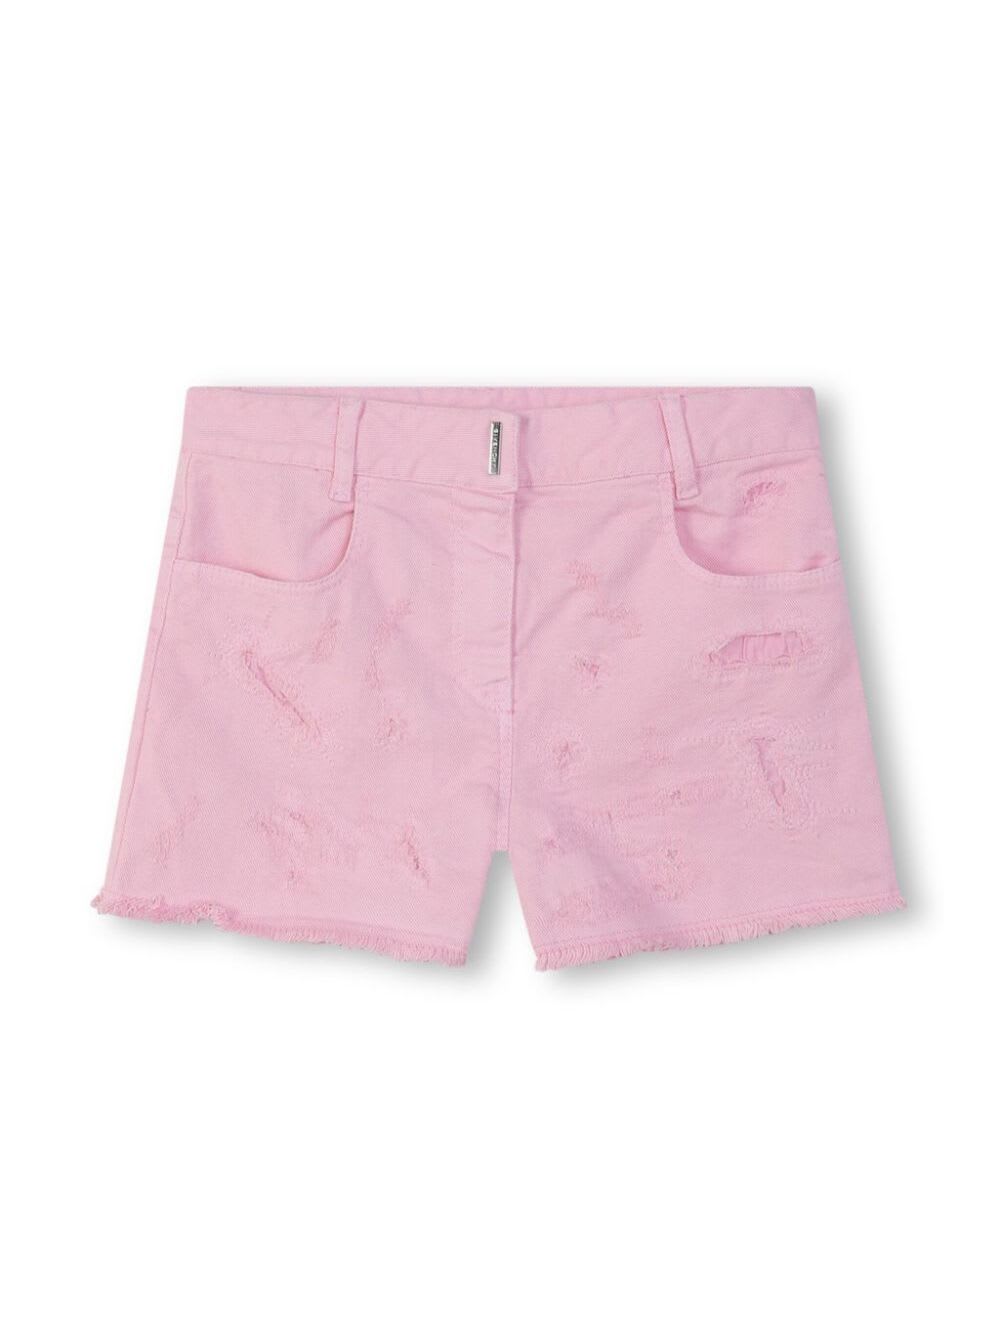 GIVENCHY PINK SHORTS WITH LOGO LETTERING DETAIL IN STRETCH COTTON DENIM GIRL